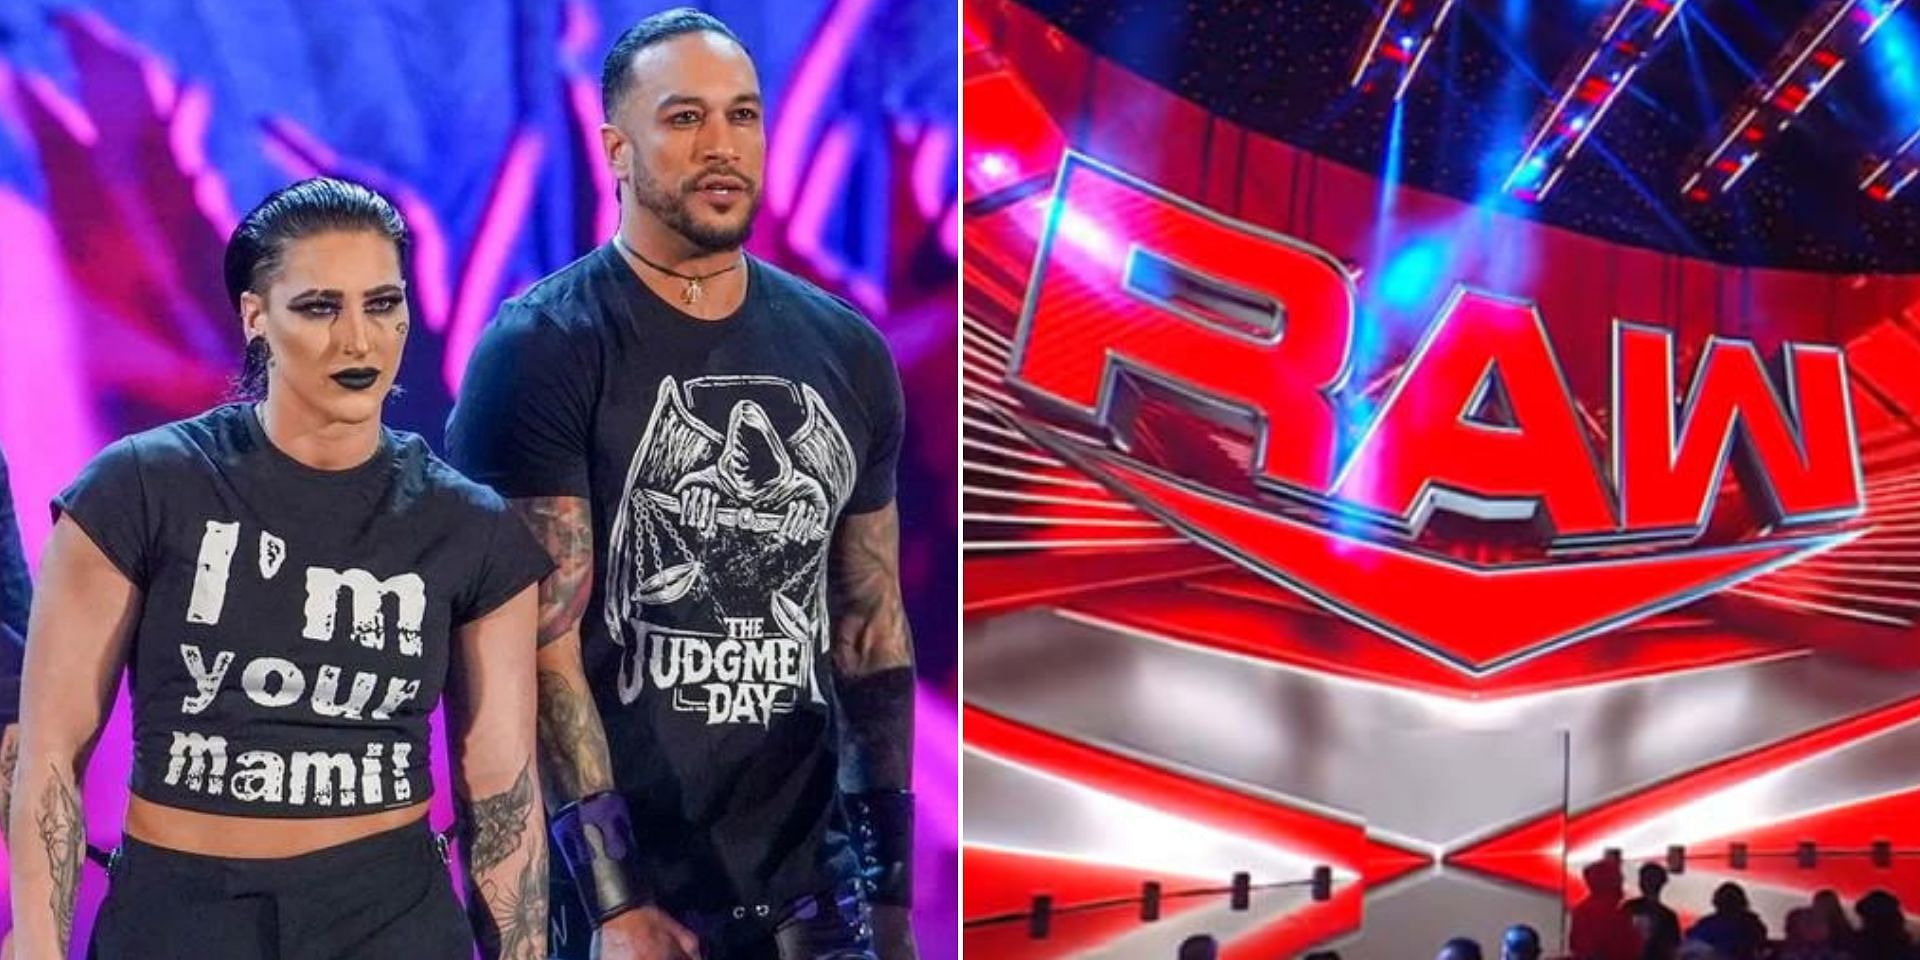 The Judgment Day were confronted by another star on RAW